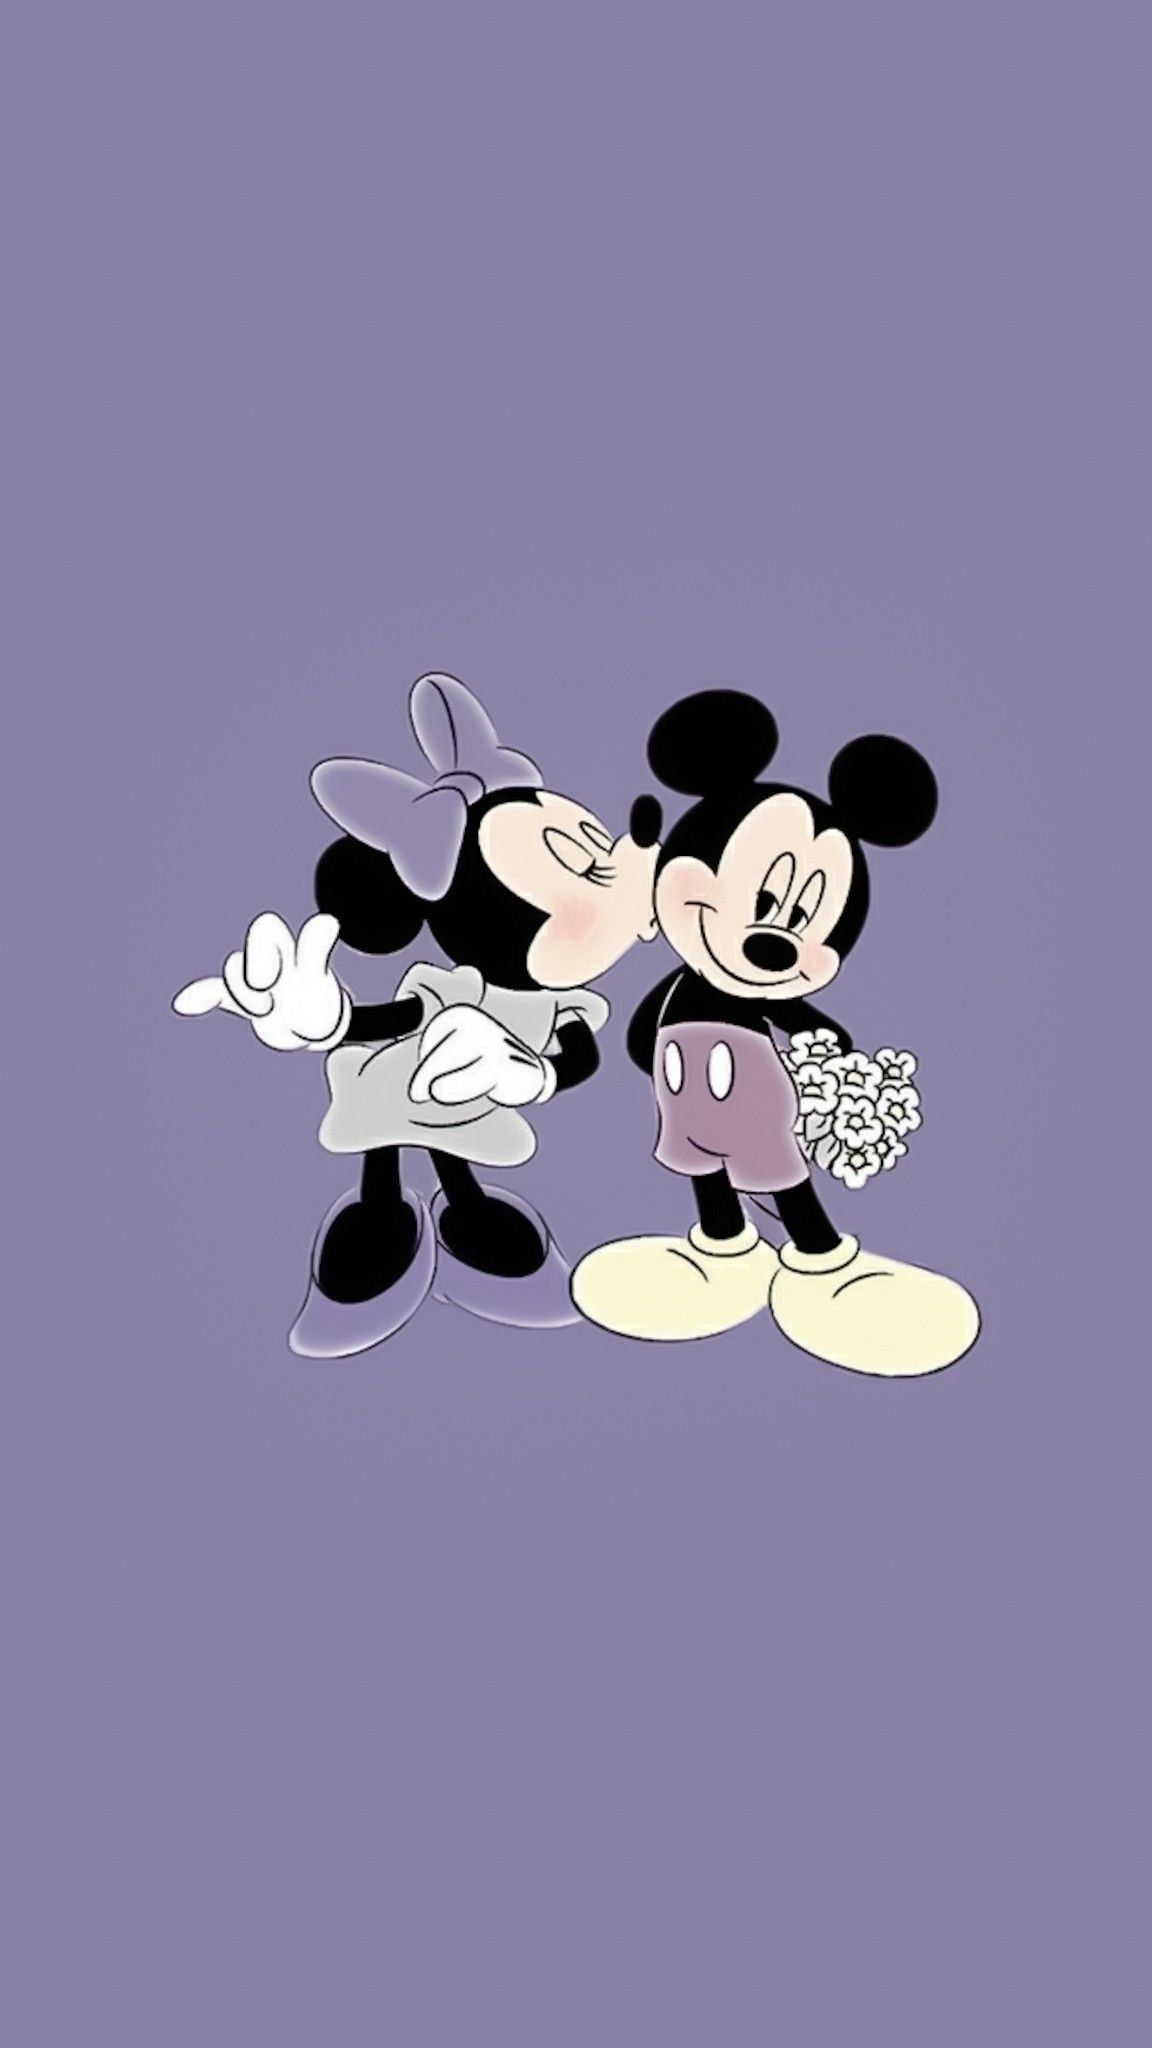 Mickey Mouse wallpaper for your phone! - Minnie Mouse